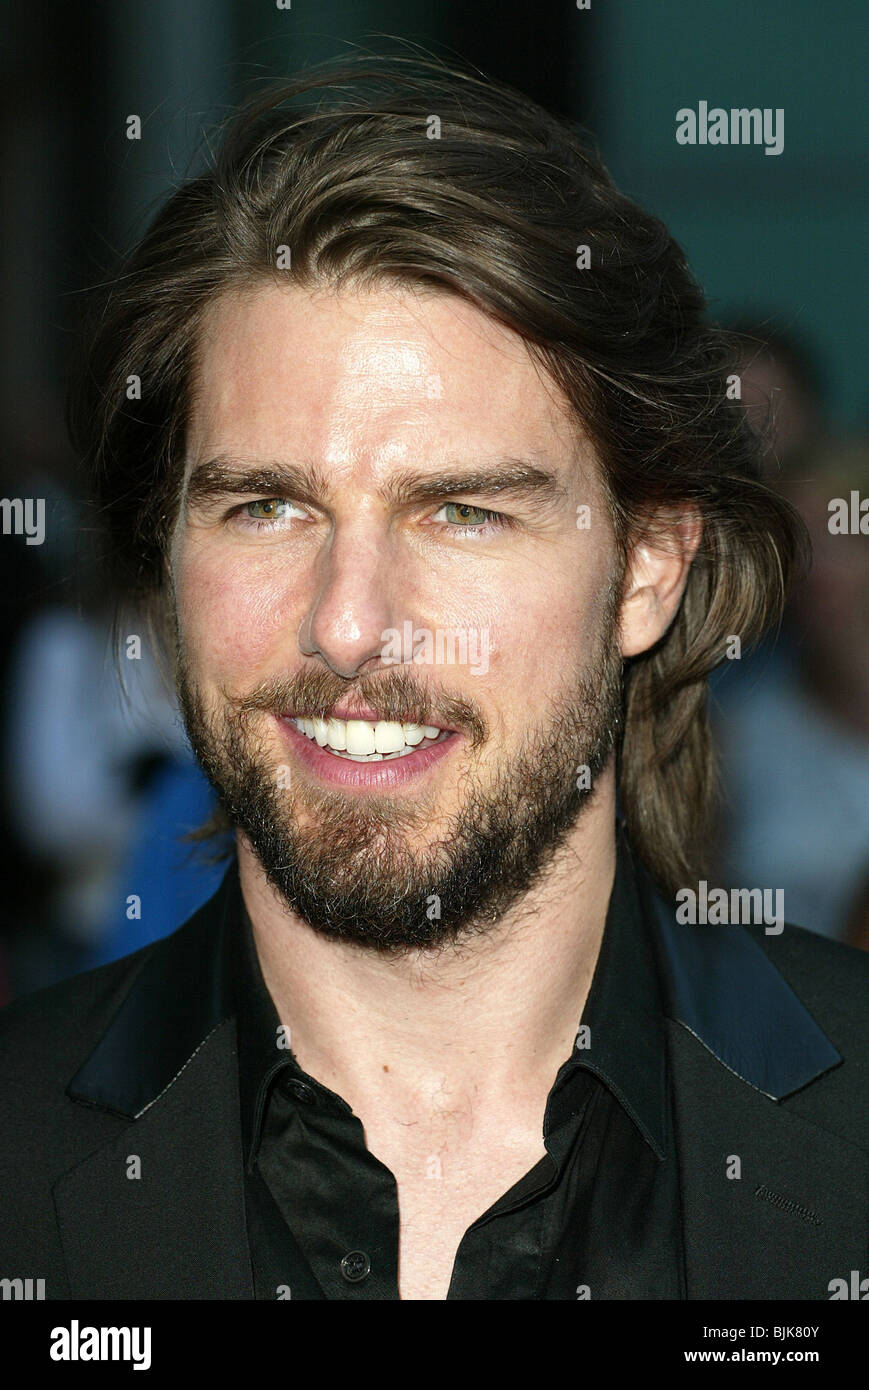 TOM CRUISE NARC HOLLYWOOD FILM FESTIVAL CINÉMA ARCLIGHT HOLLYWOOD LOS ANGELES USA 06 Octobre 2002 Banque D'Images